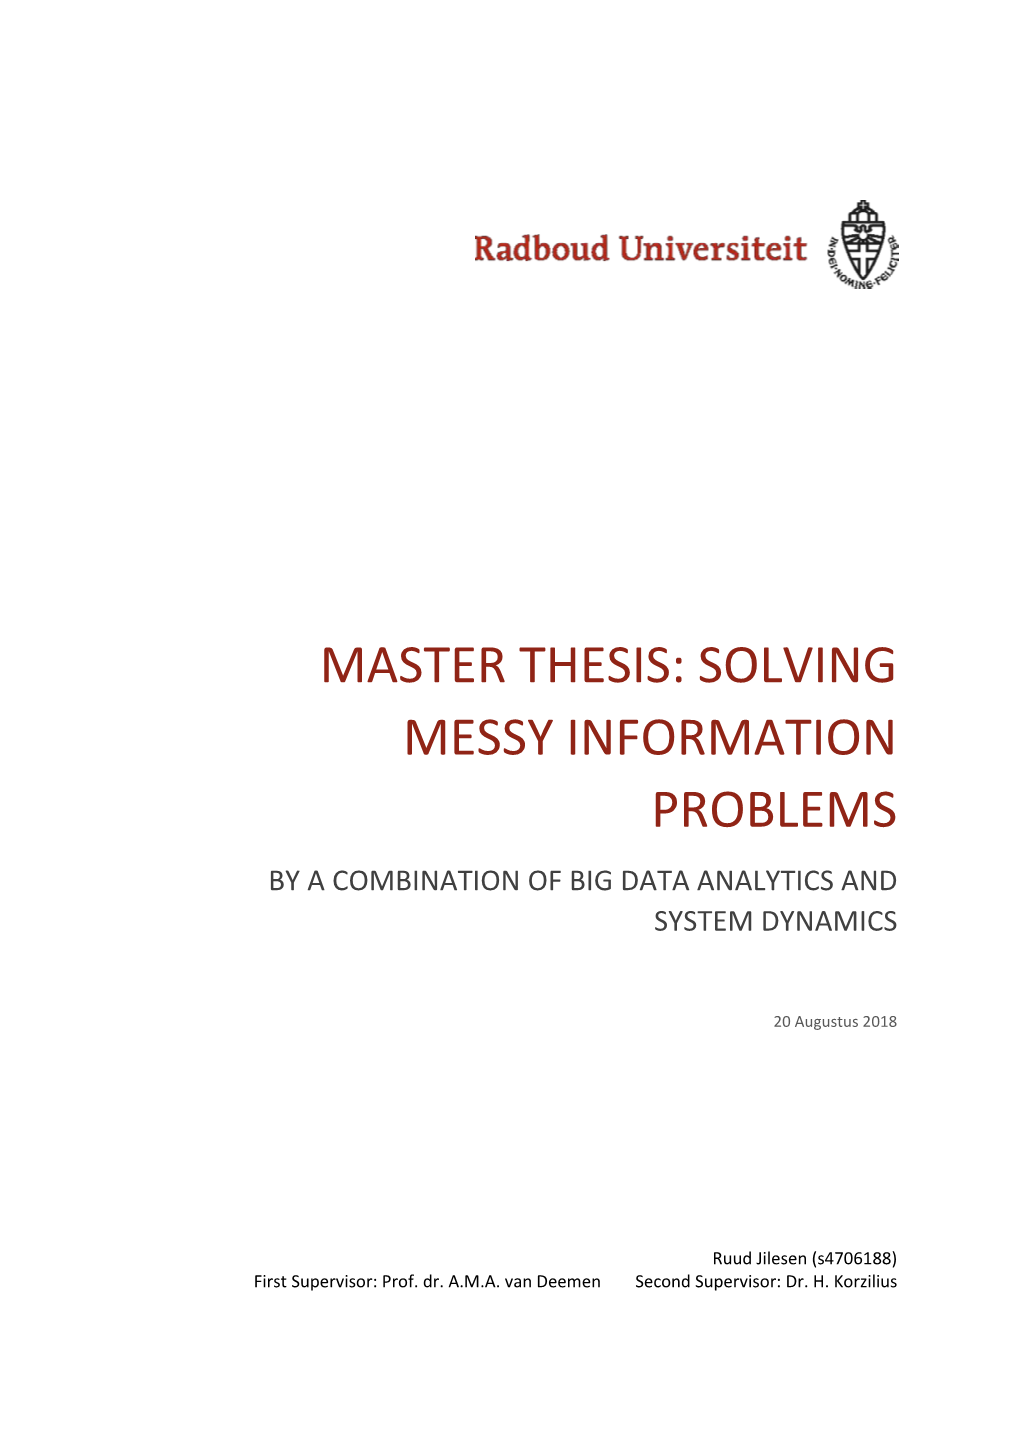 Master Thesis: Solving Messy Information Problems by a Combination of Big Data Analytics and System Dynamics